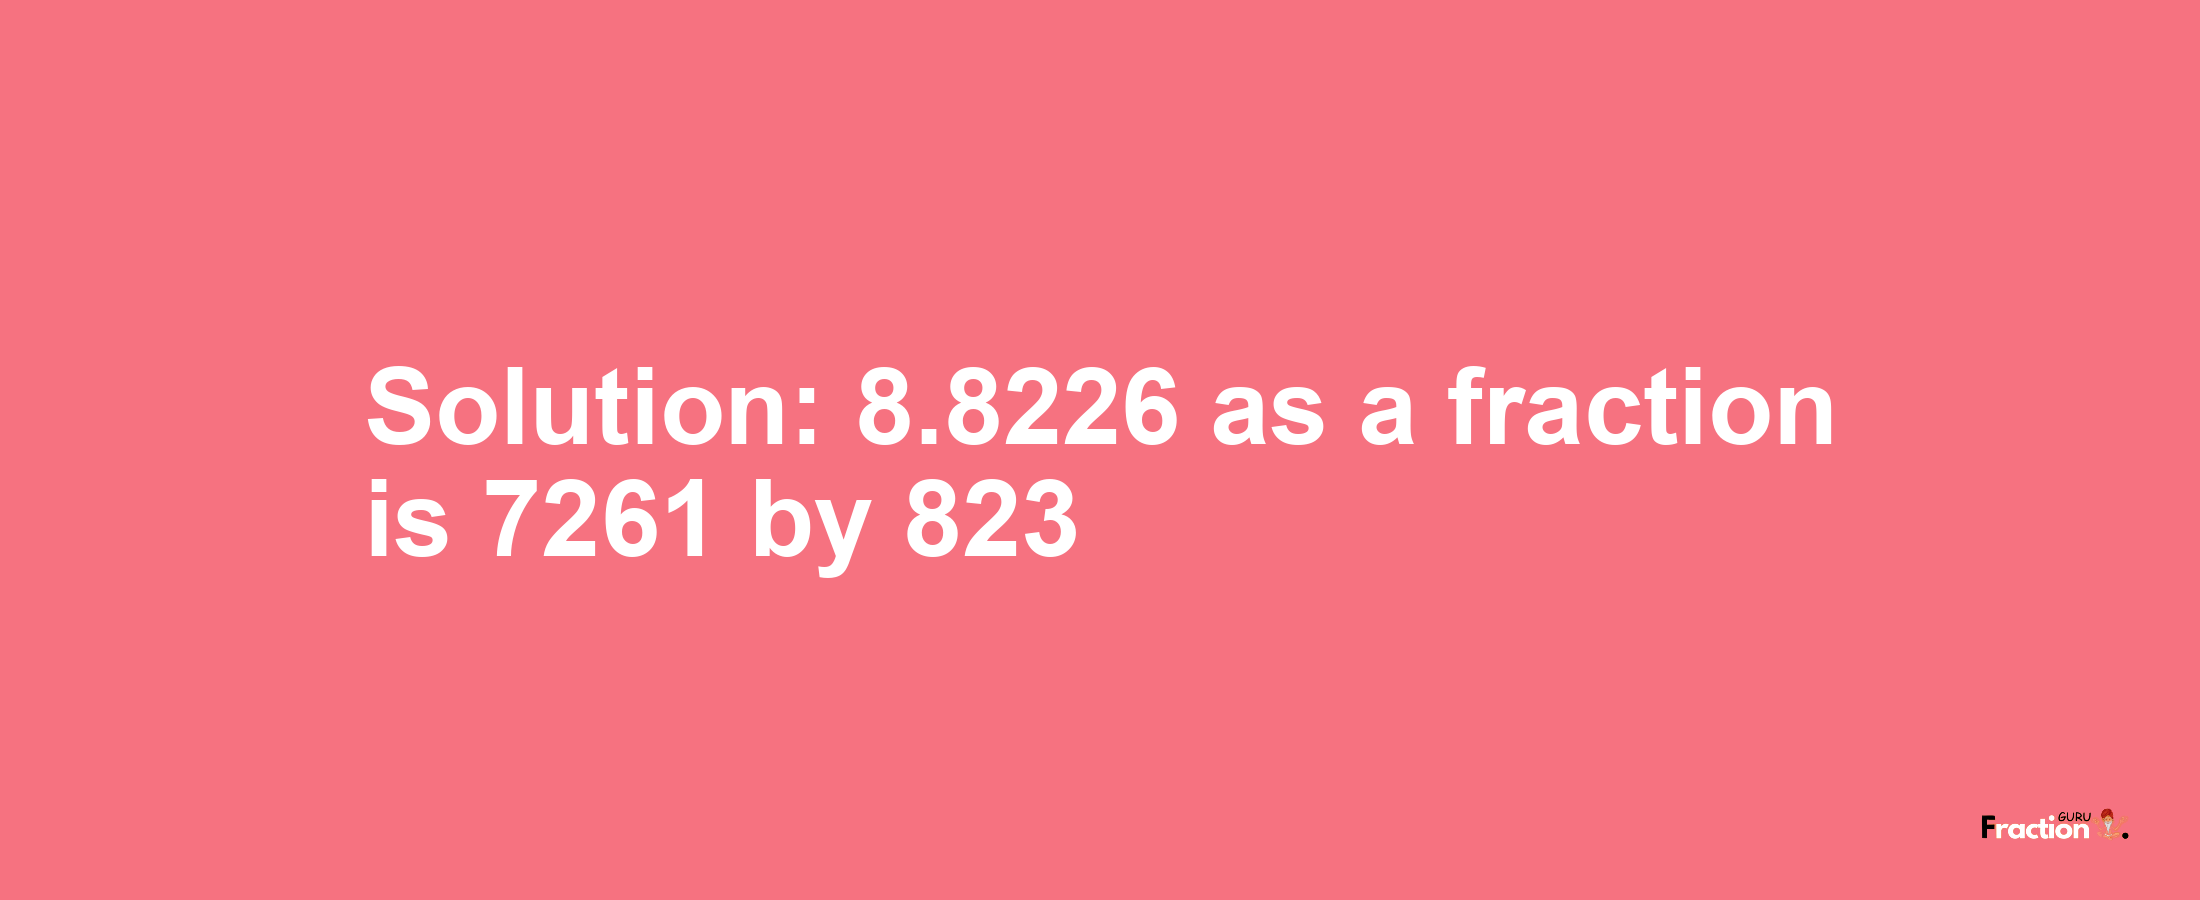 Solution:8.8226 as a fraction is 7261/823